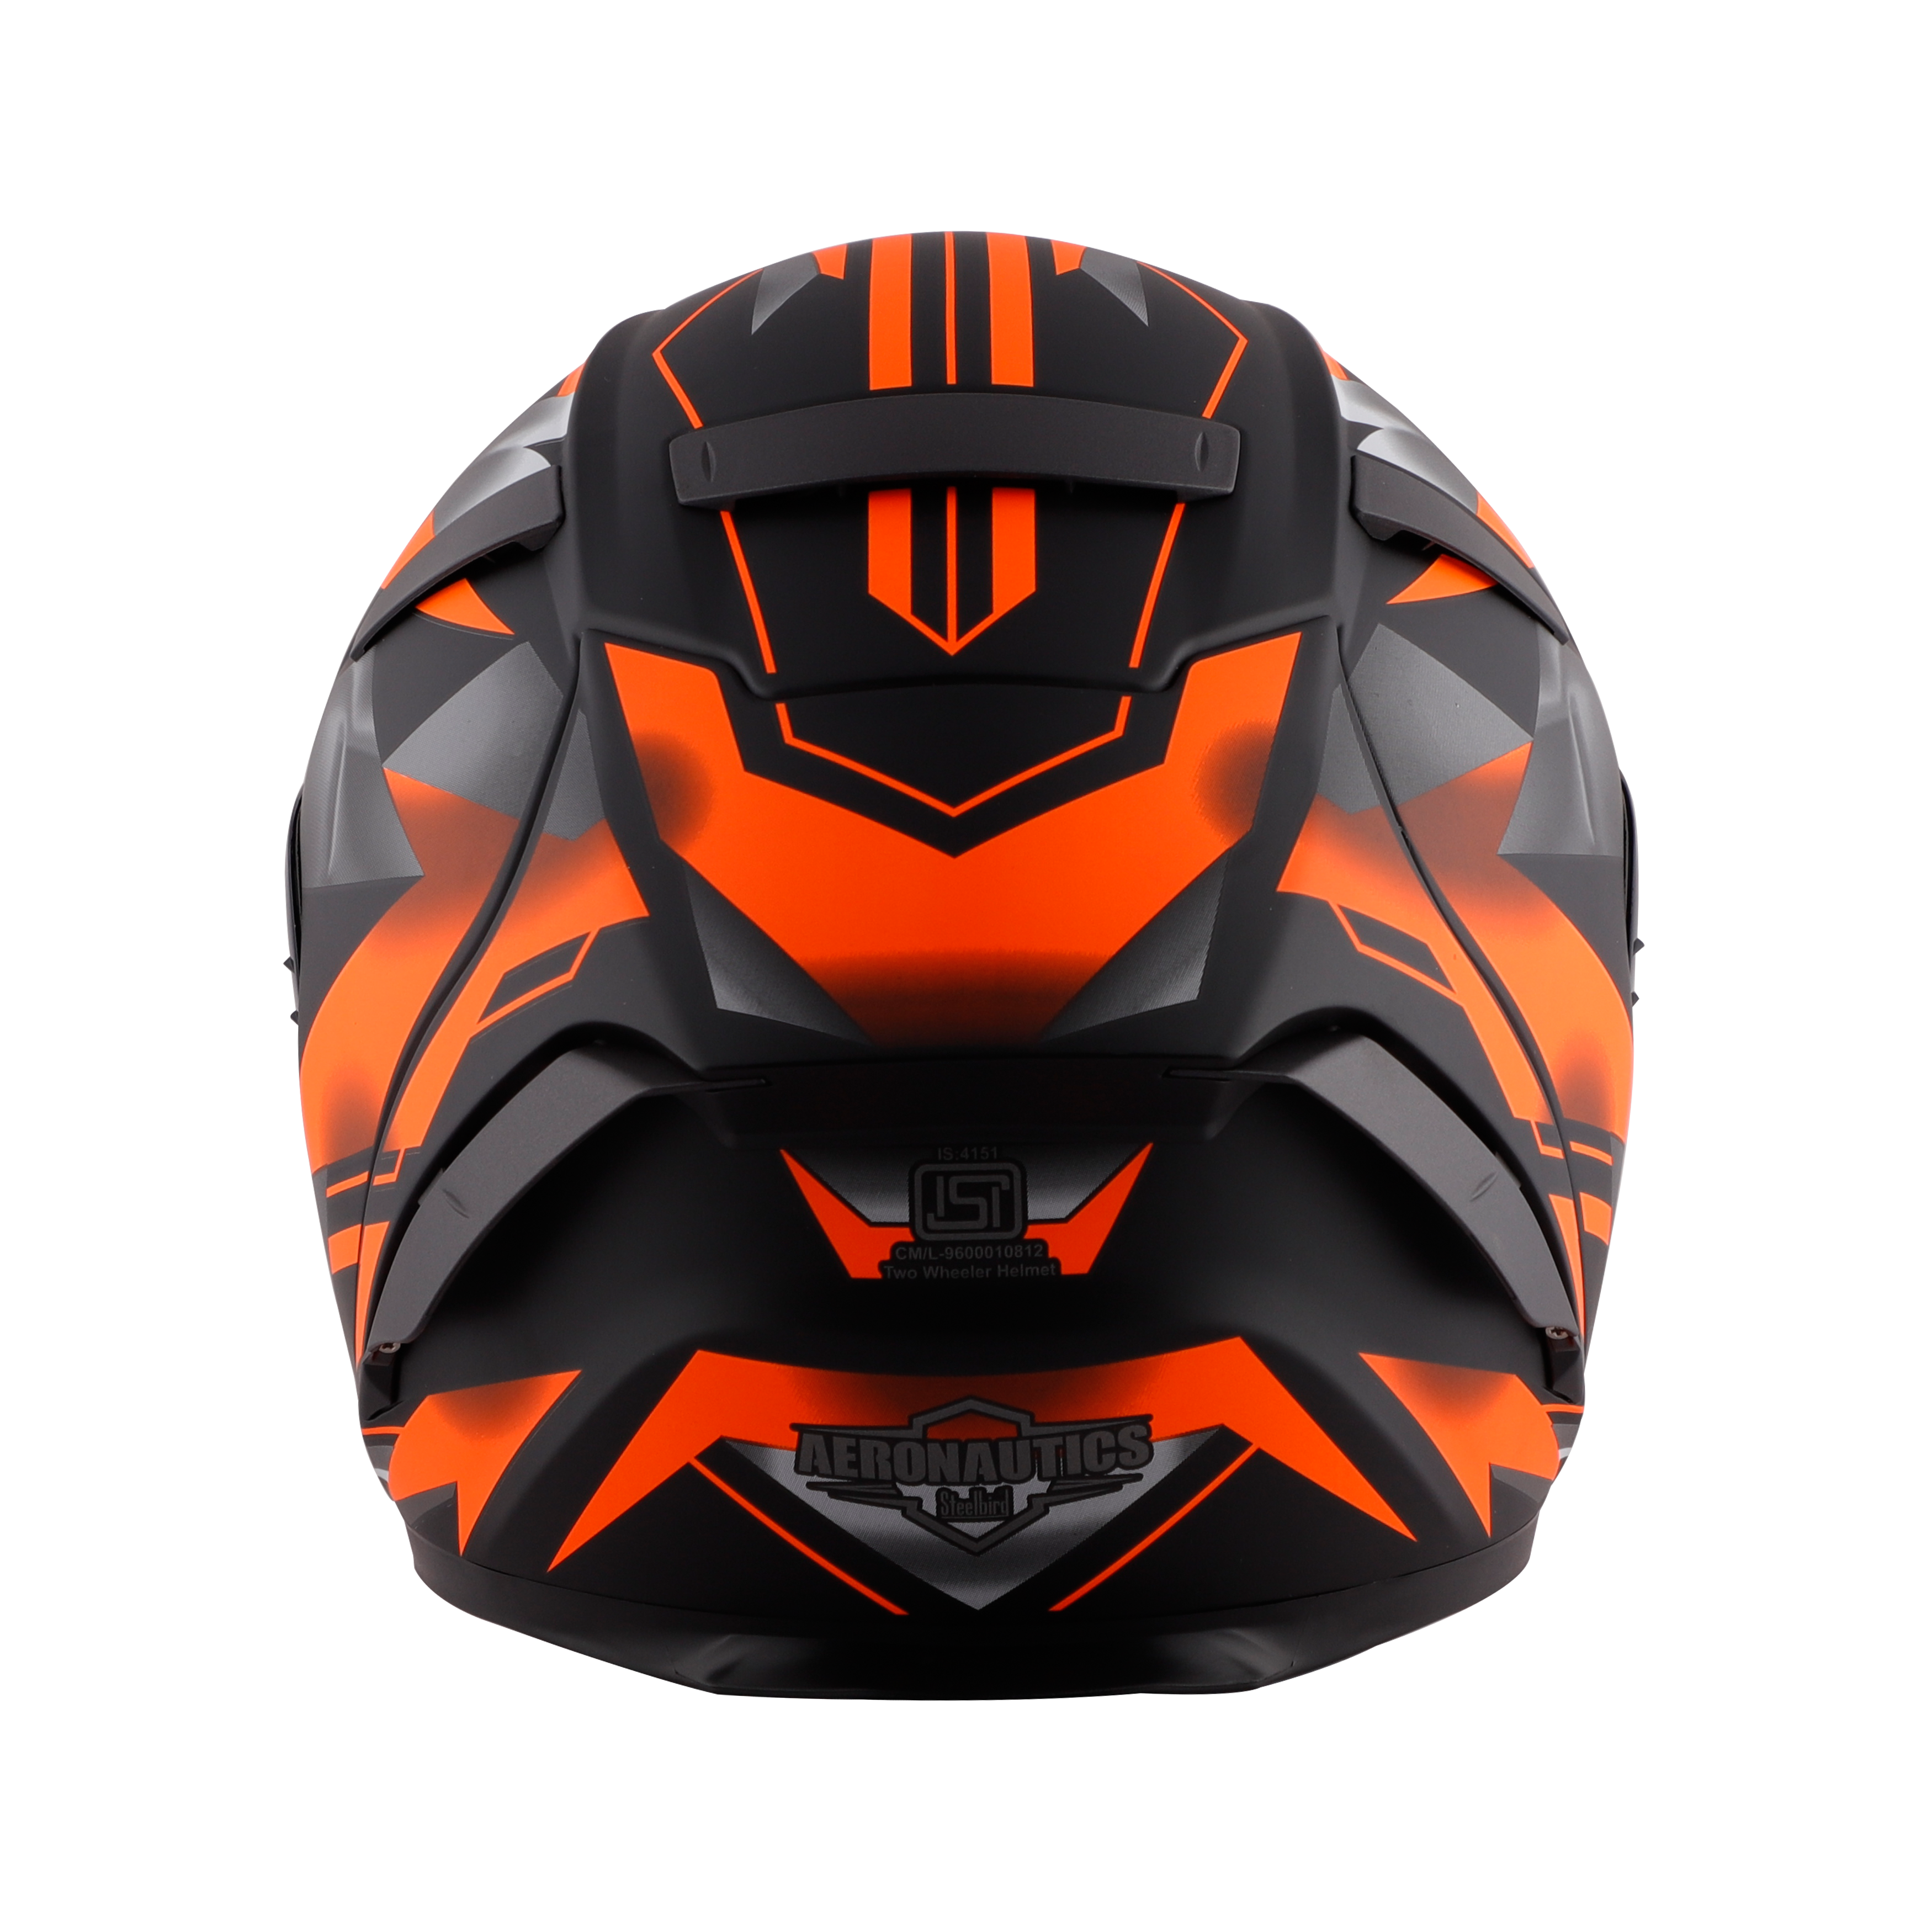 SA-2 METALLIC GLOSSY BLACK WITH FLUO ORANGE ( FITTED WITH CLEAR VISOR  EXTRA CHROME GOLD VISOR FREE) WITH ANTI-FOG SHIELD HOLDER